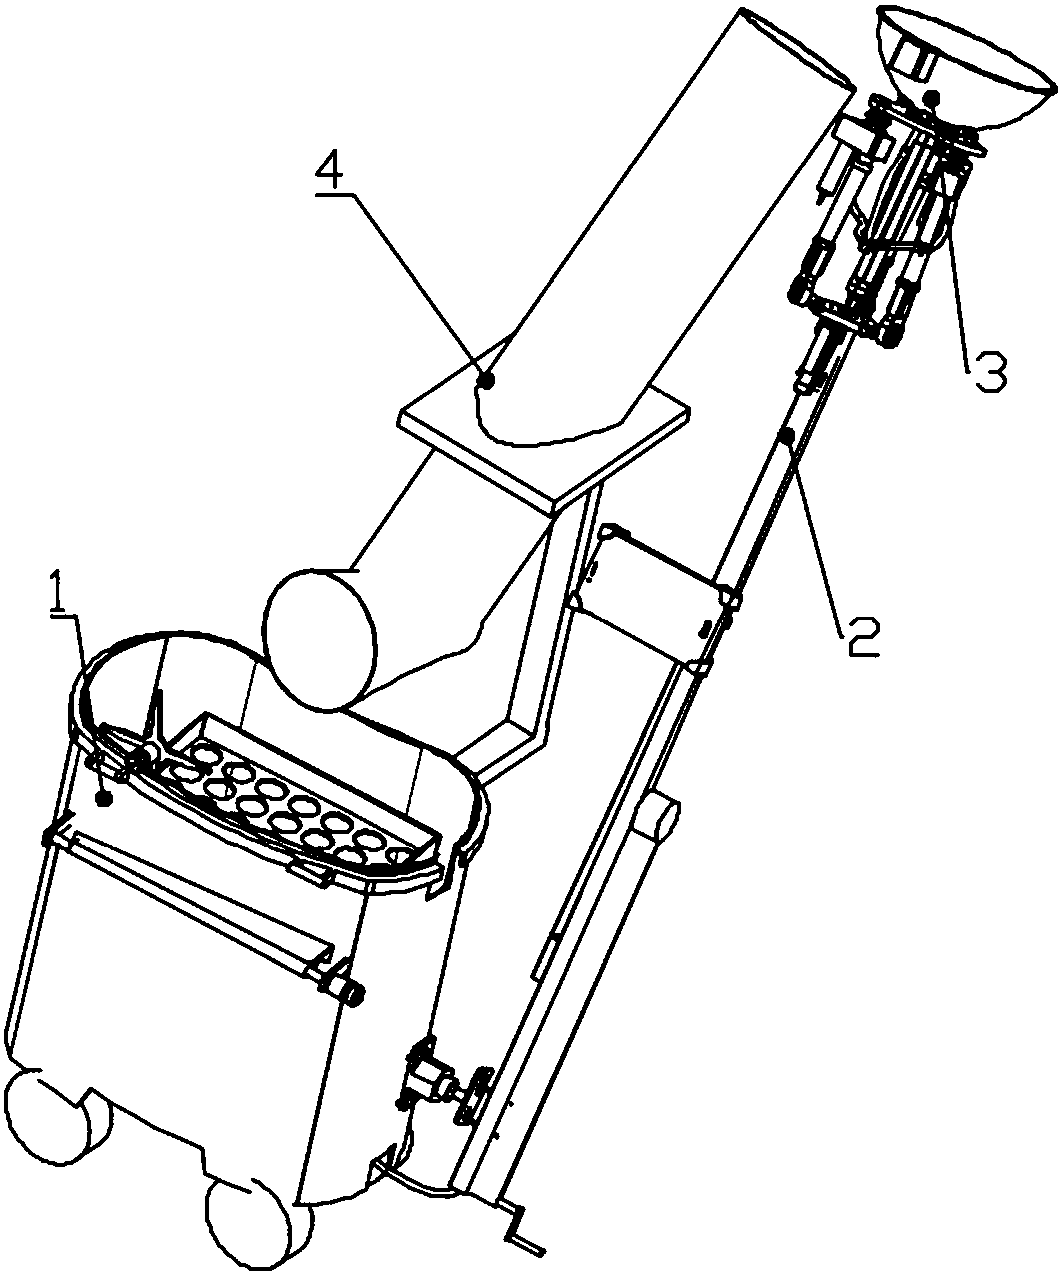 Novel apple picking and sorting device and method